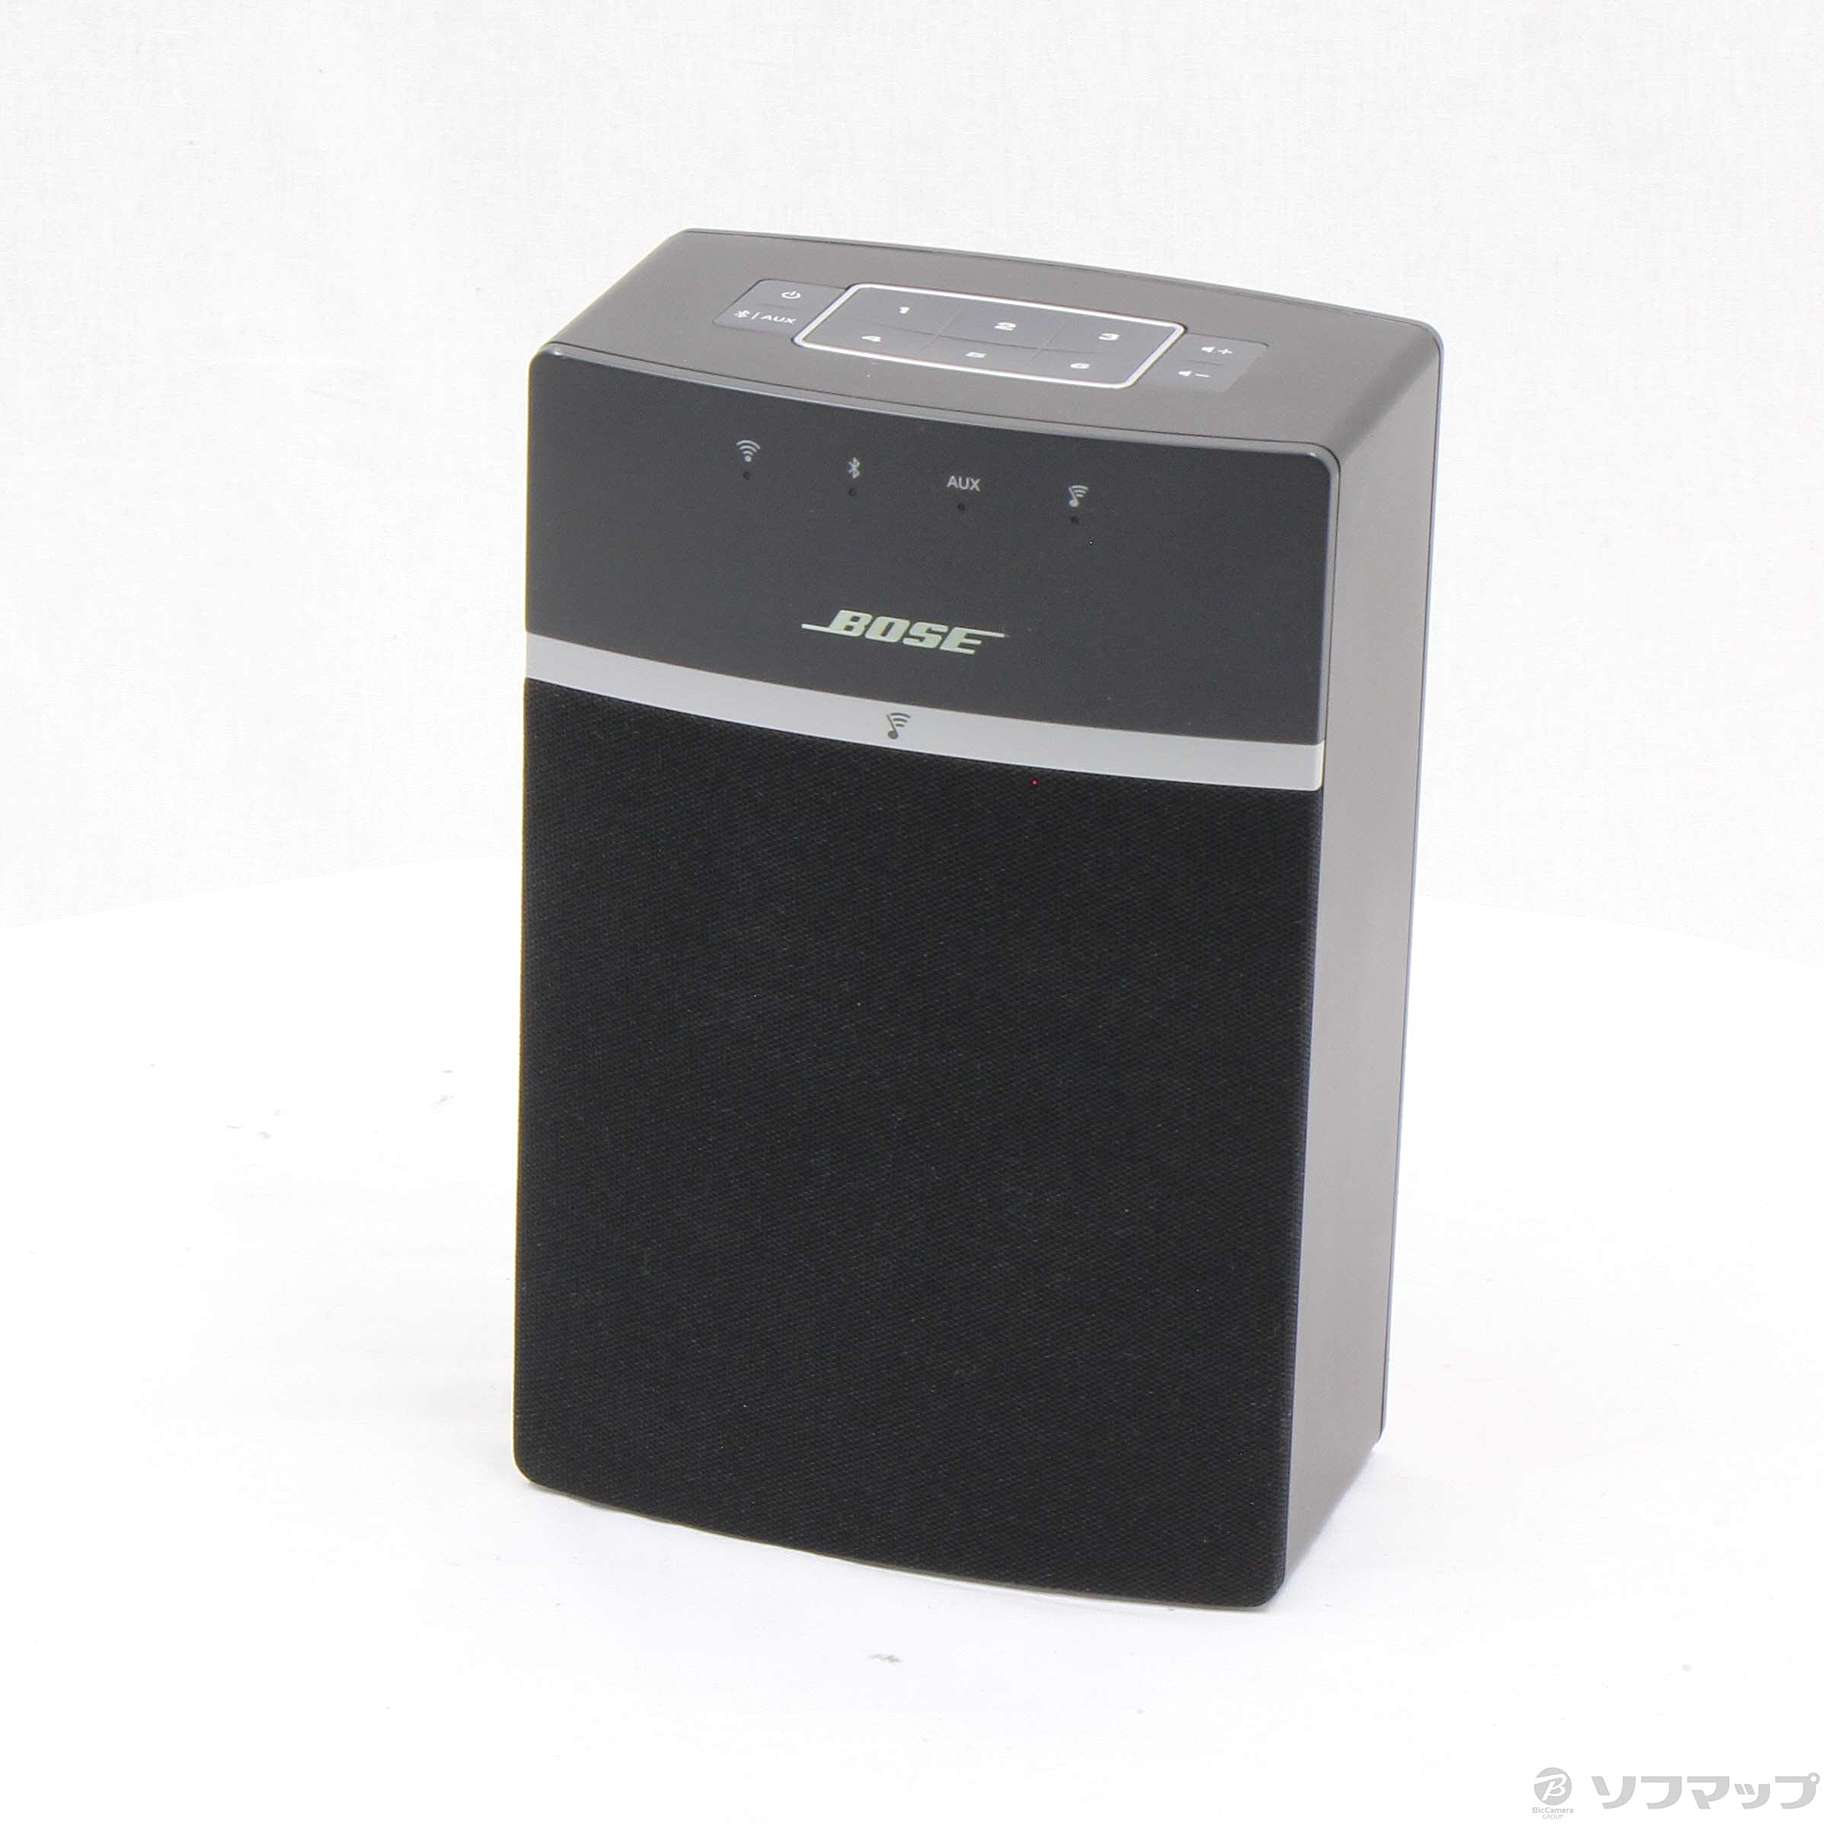 SOUNDTOUCH 10 BOSE